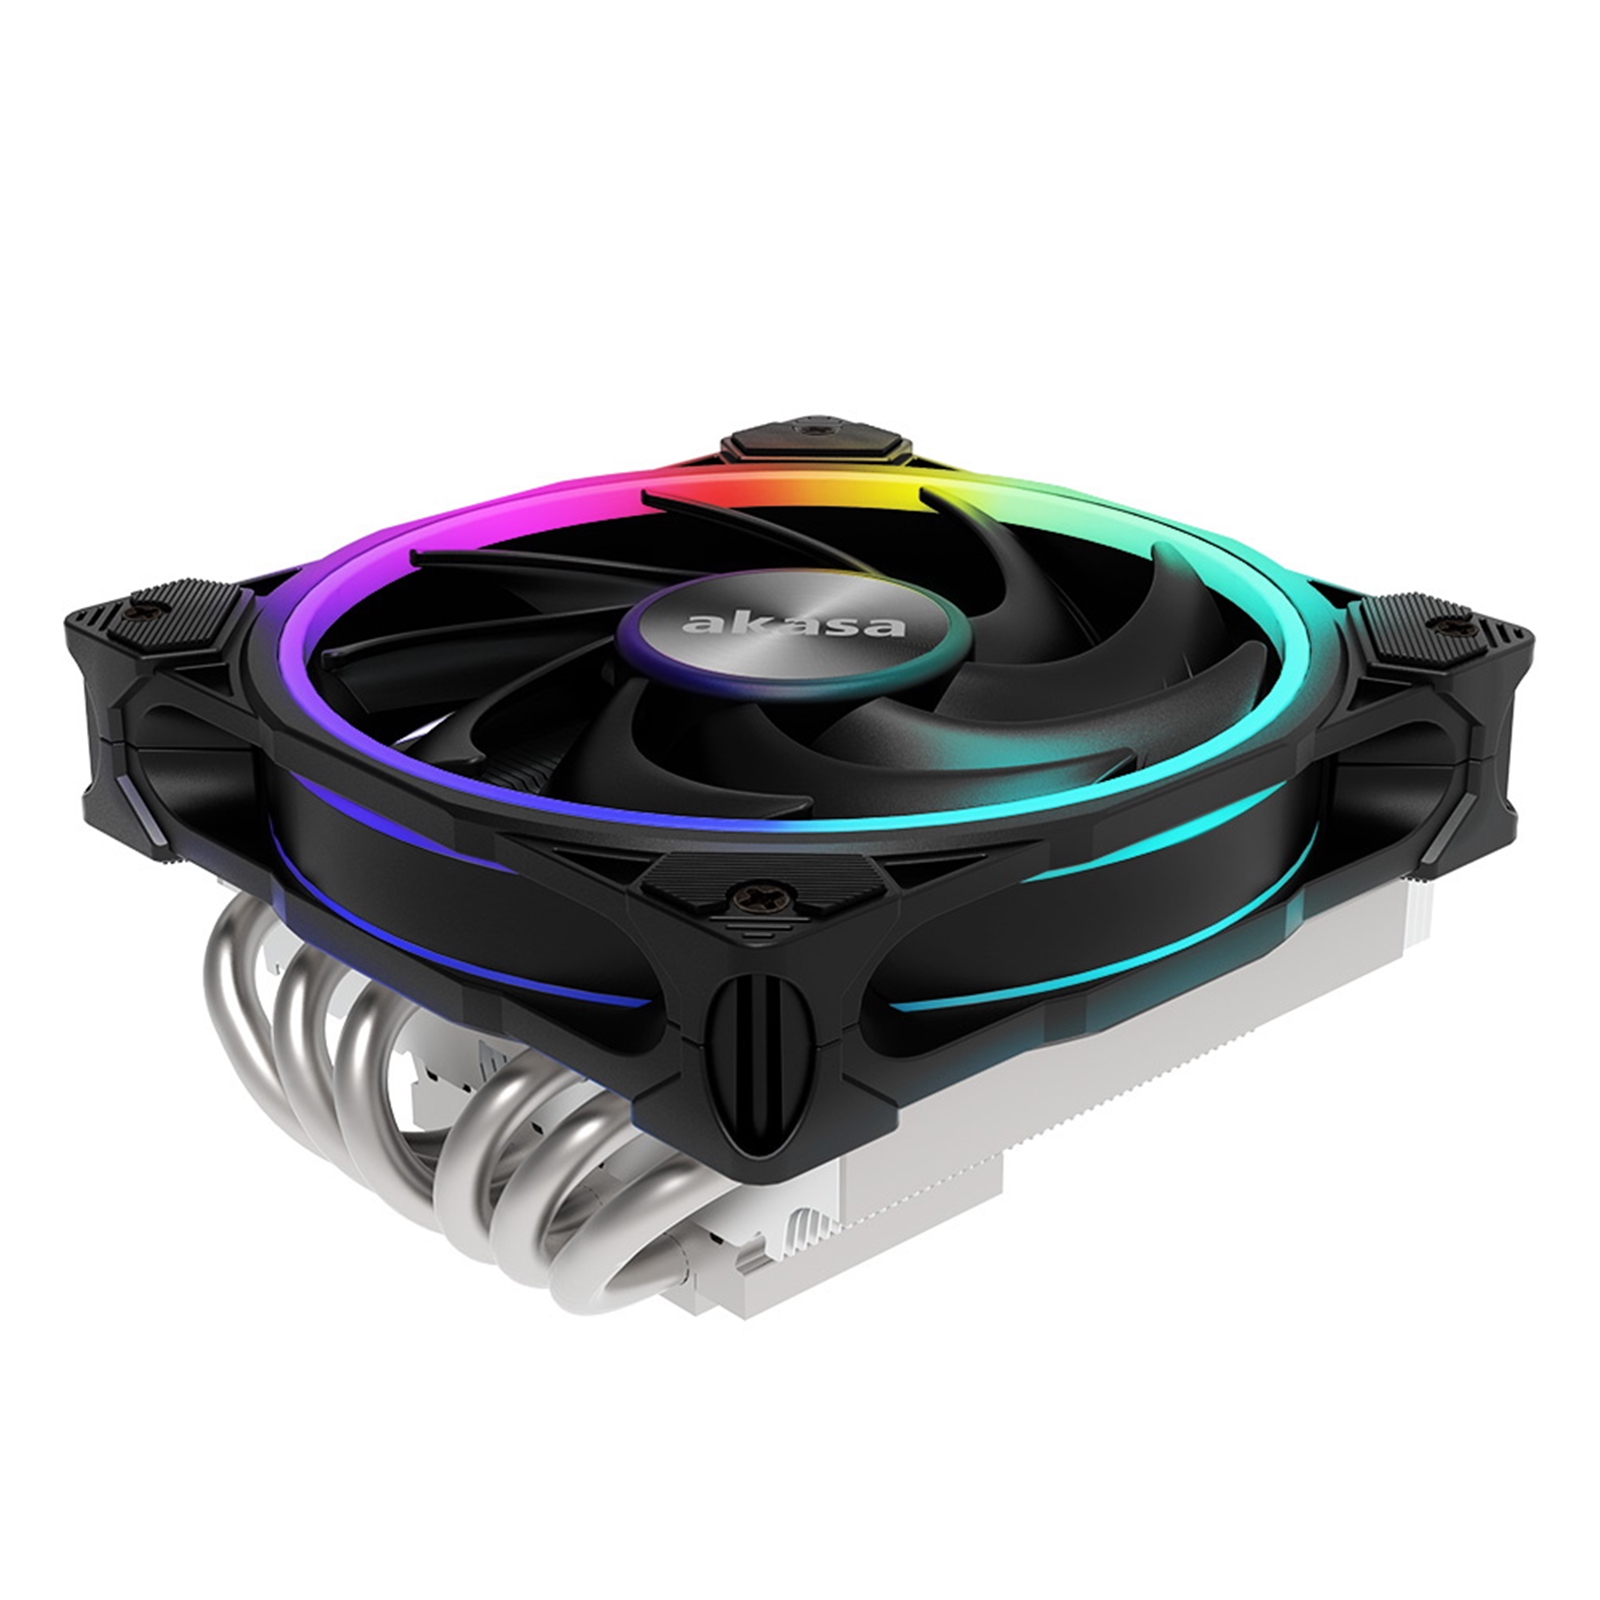 AKASA SOHO H6L Low-Profile Fan CPU Cooler, Universal Socket, 120mm PWM Addressable RGB LED Fan, 2000RPM, 6 Heat Pipes, Low-Profile at 67.2mm Height, Intelligent PWM Speed Control, Secure & Easy Mounting